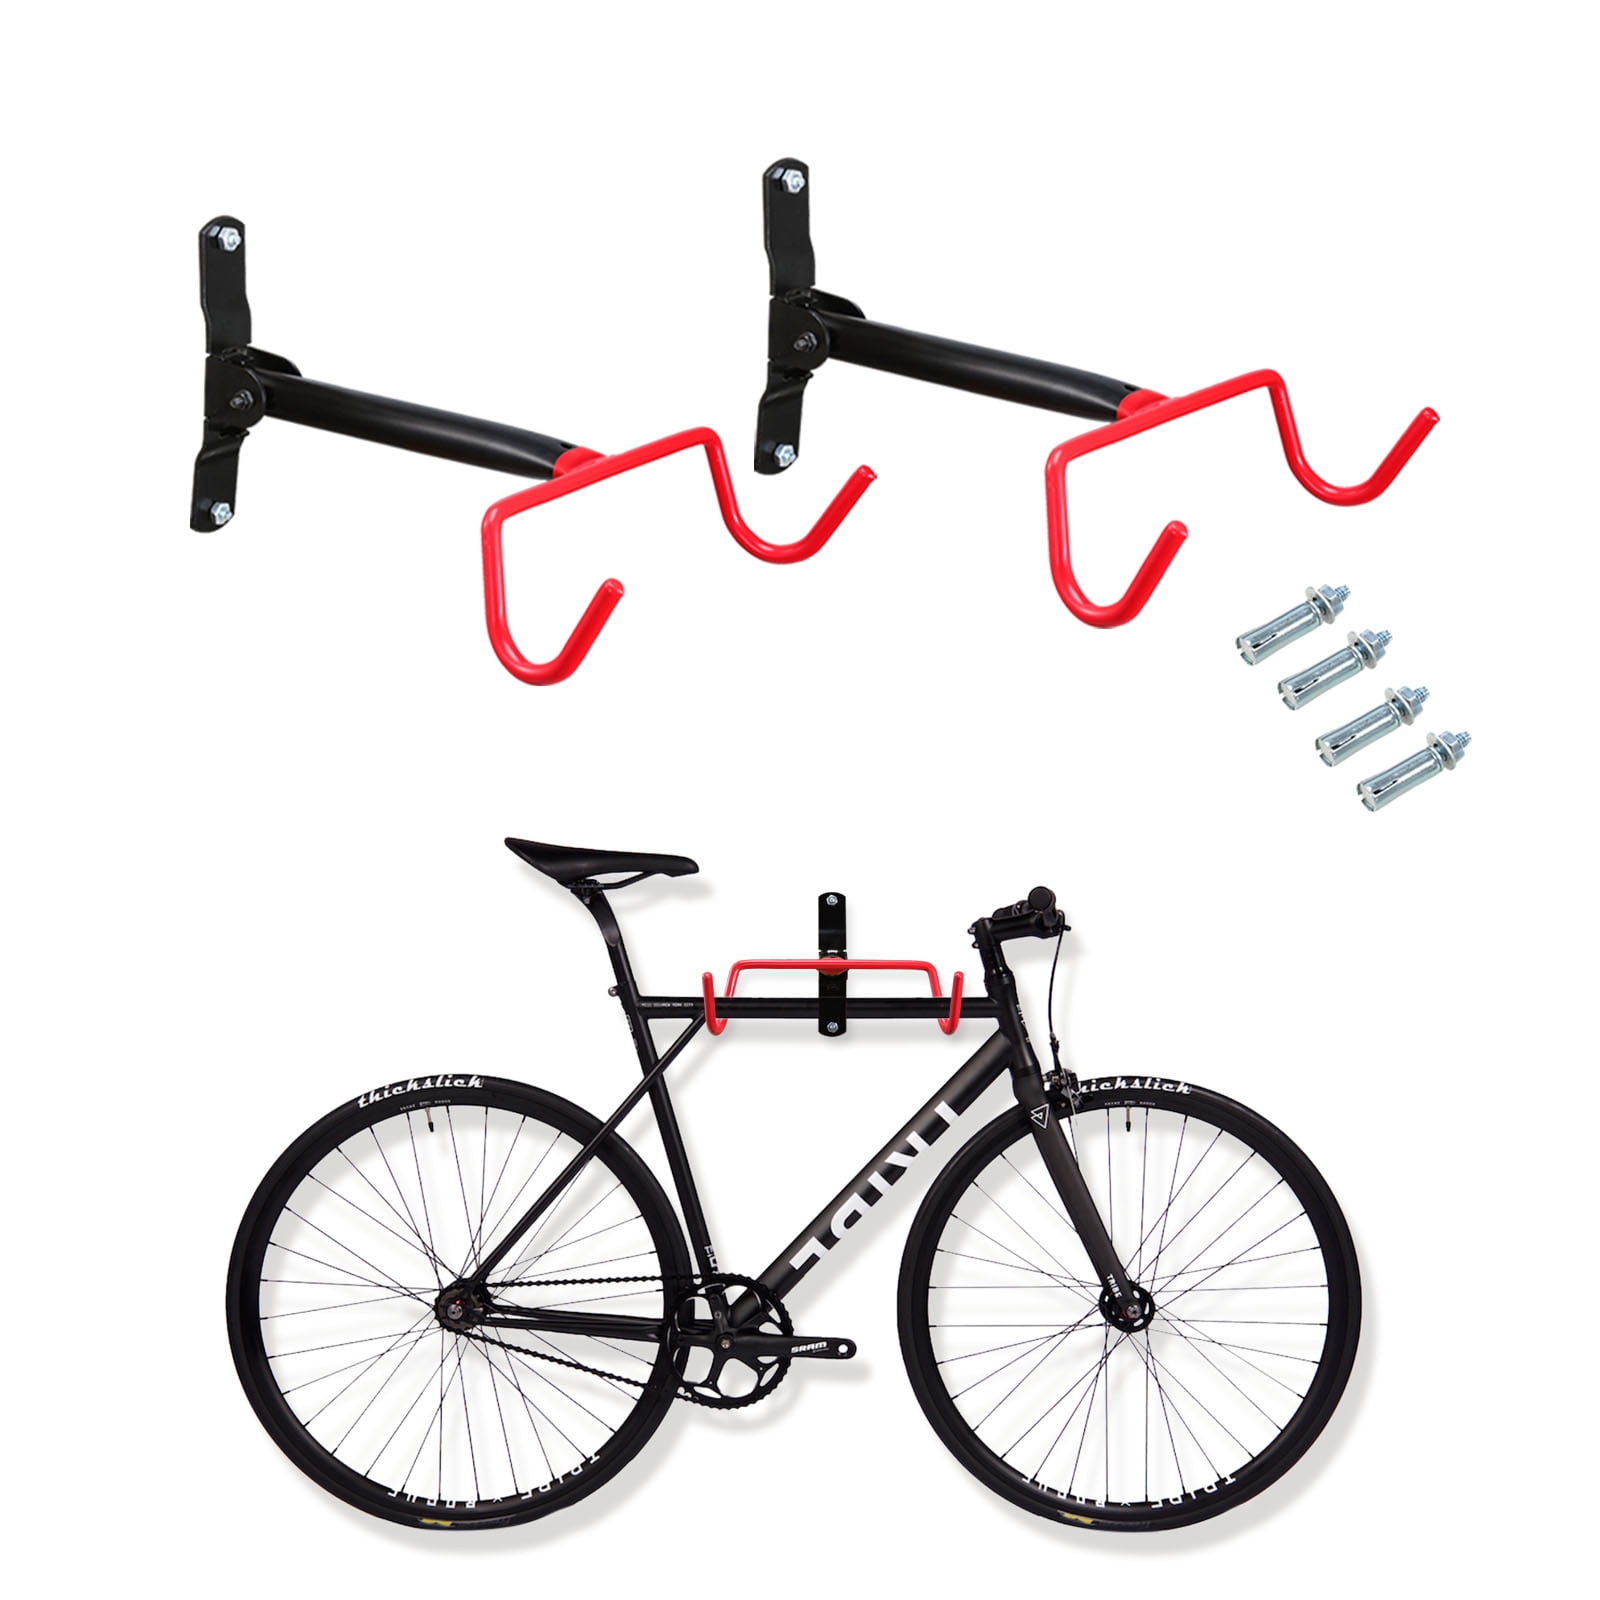 2PACK GIANT STORAGE HANDY HANGER HOOKS GARAGE HOOK BICYCLES HOSES and MORE 